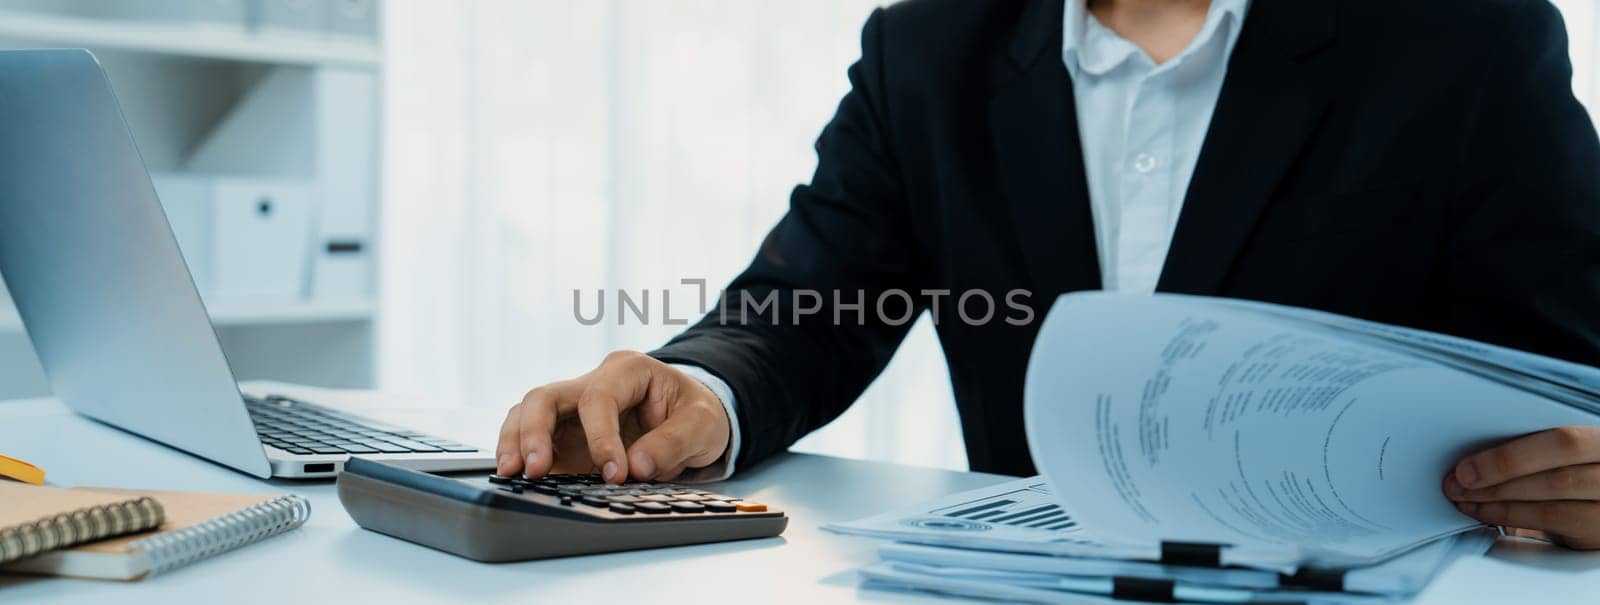 Corporate accountant use calculator to calculate and maximize tax refunds and improve financial performance based on financial data report. Modern business accounting in panorama. Shrewd